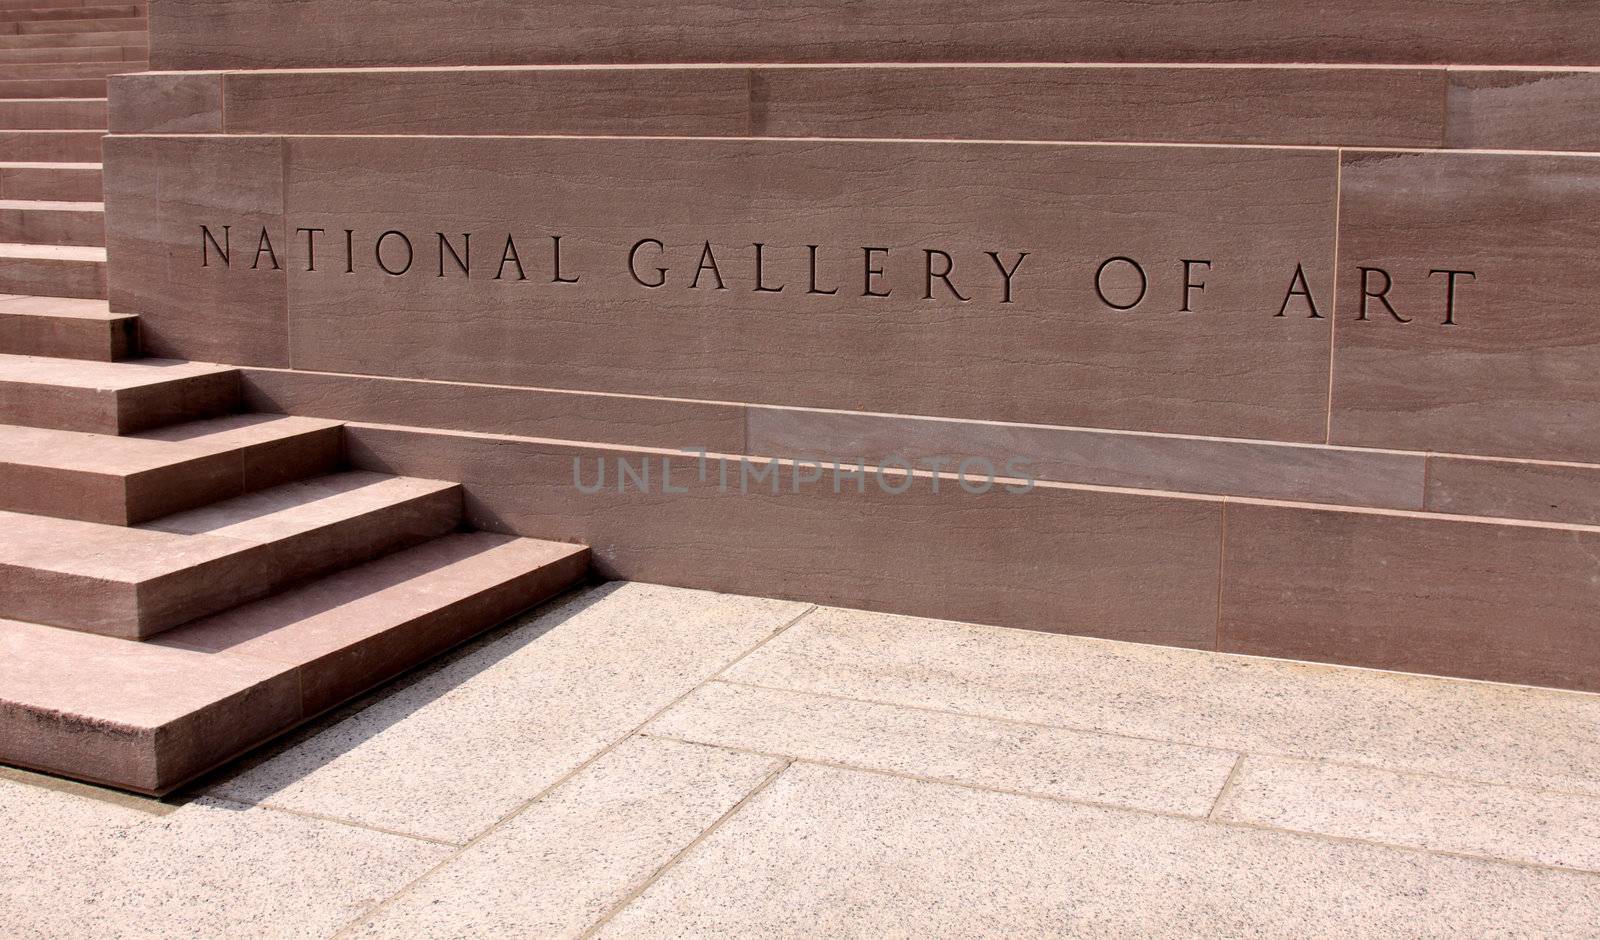 Lettering for the National Gallery of Art in Washington, DC.